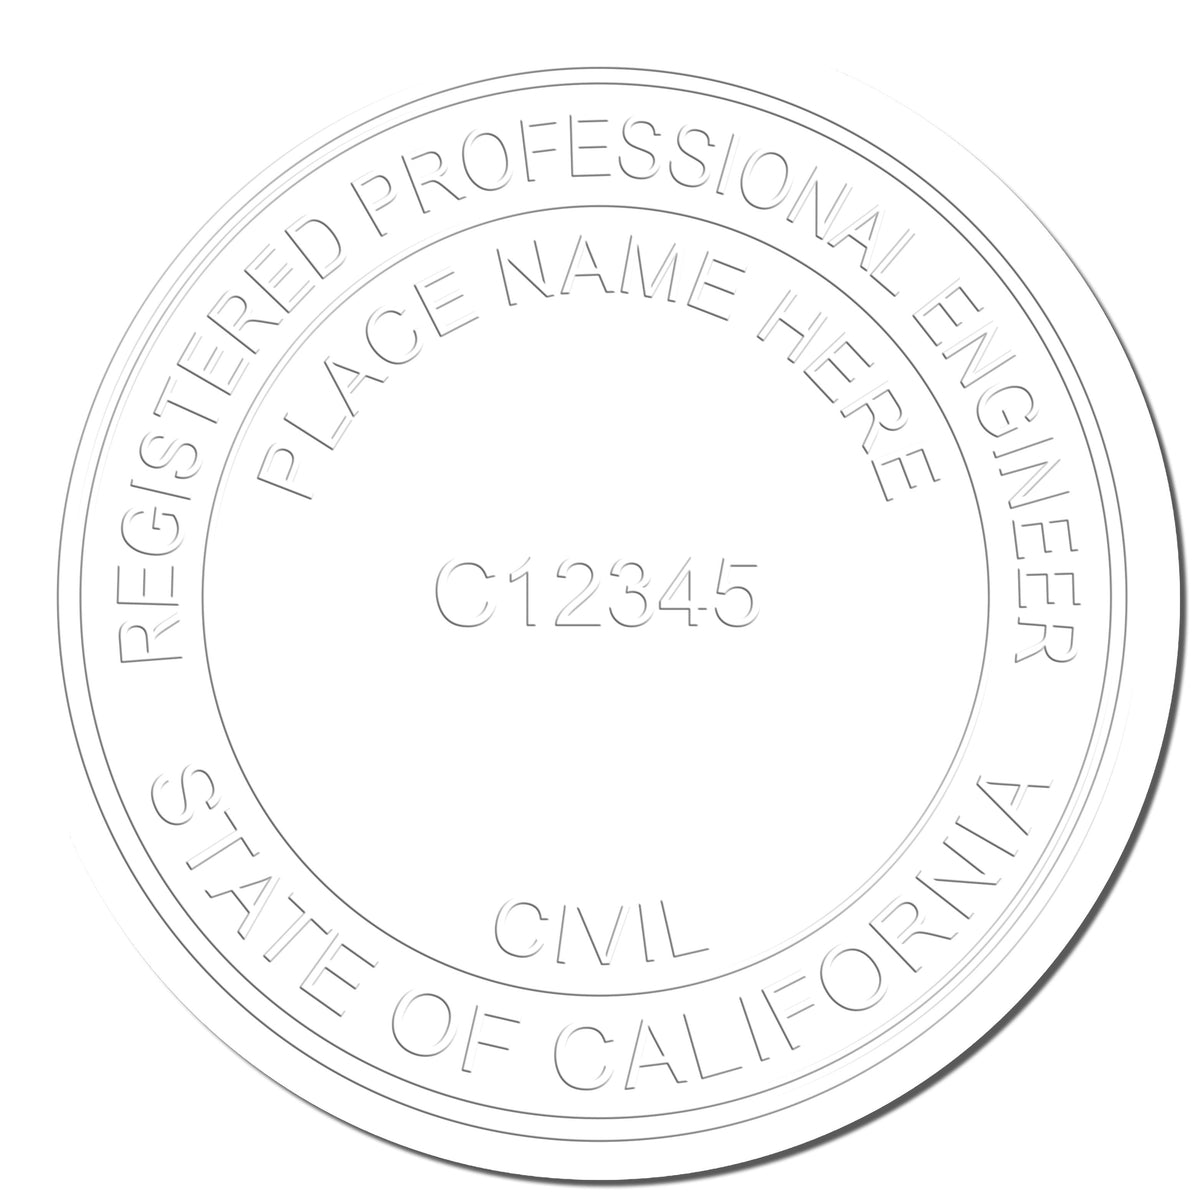 Another Example of a stamped impression of the California Engineer Desk Seal on a piece of office paper.